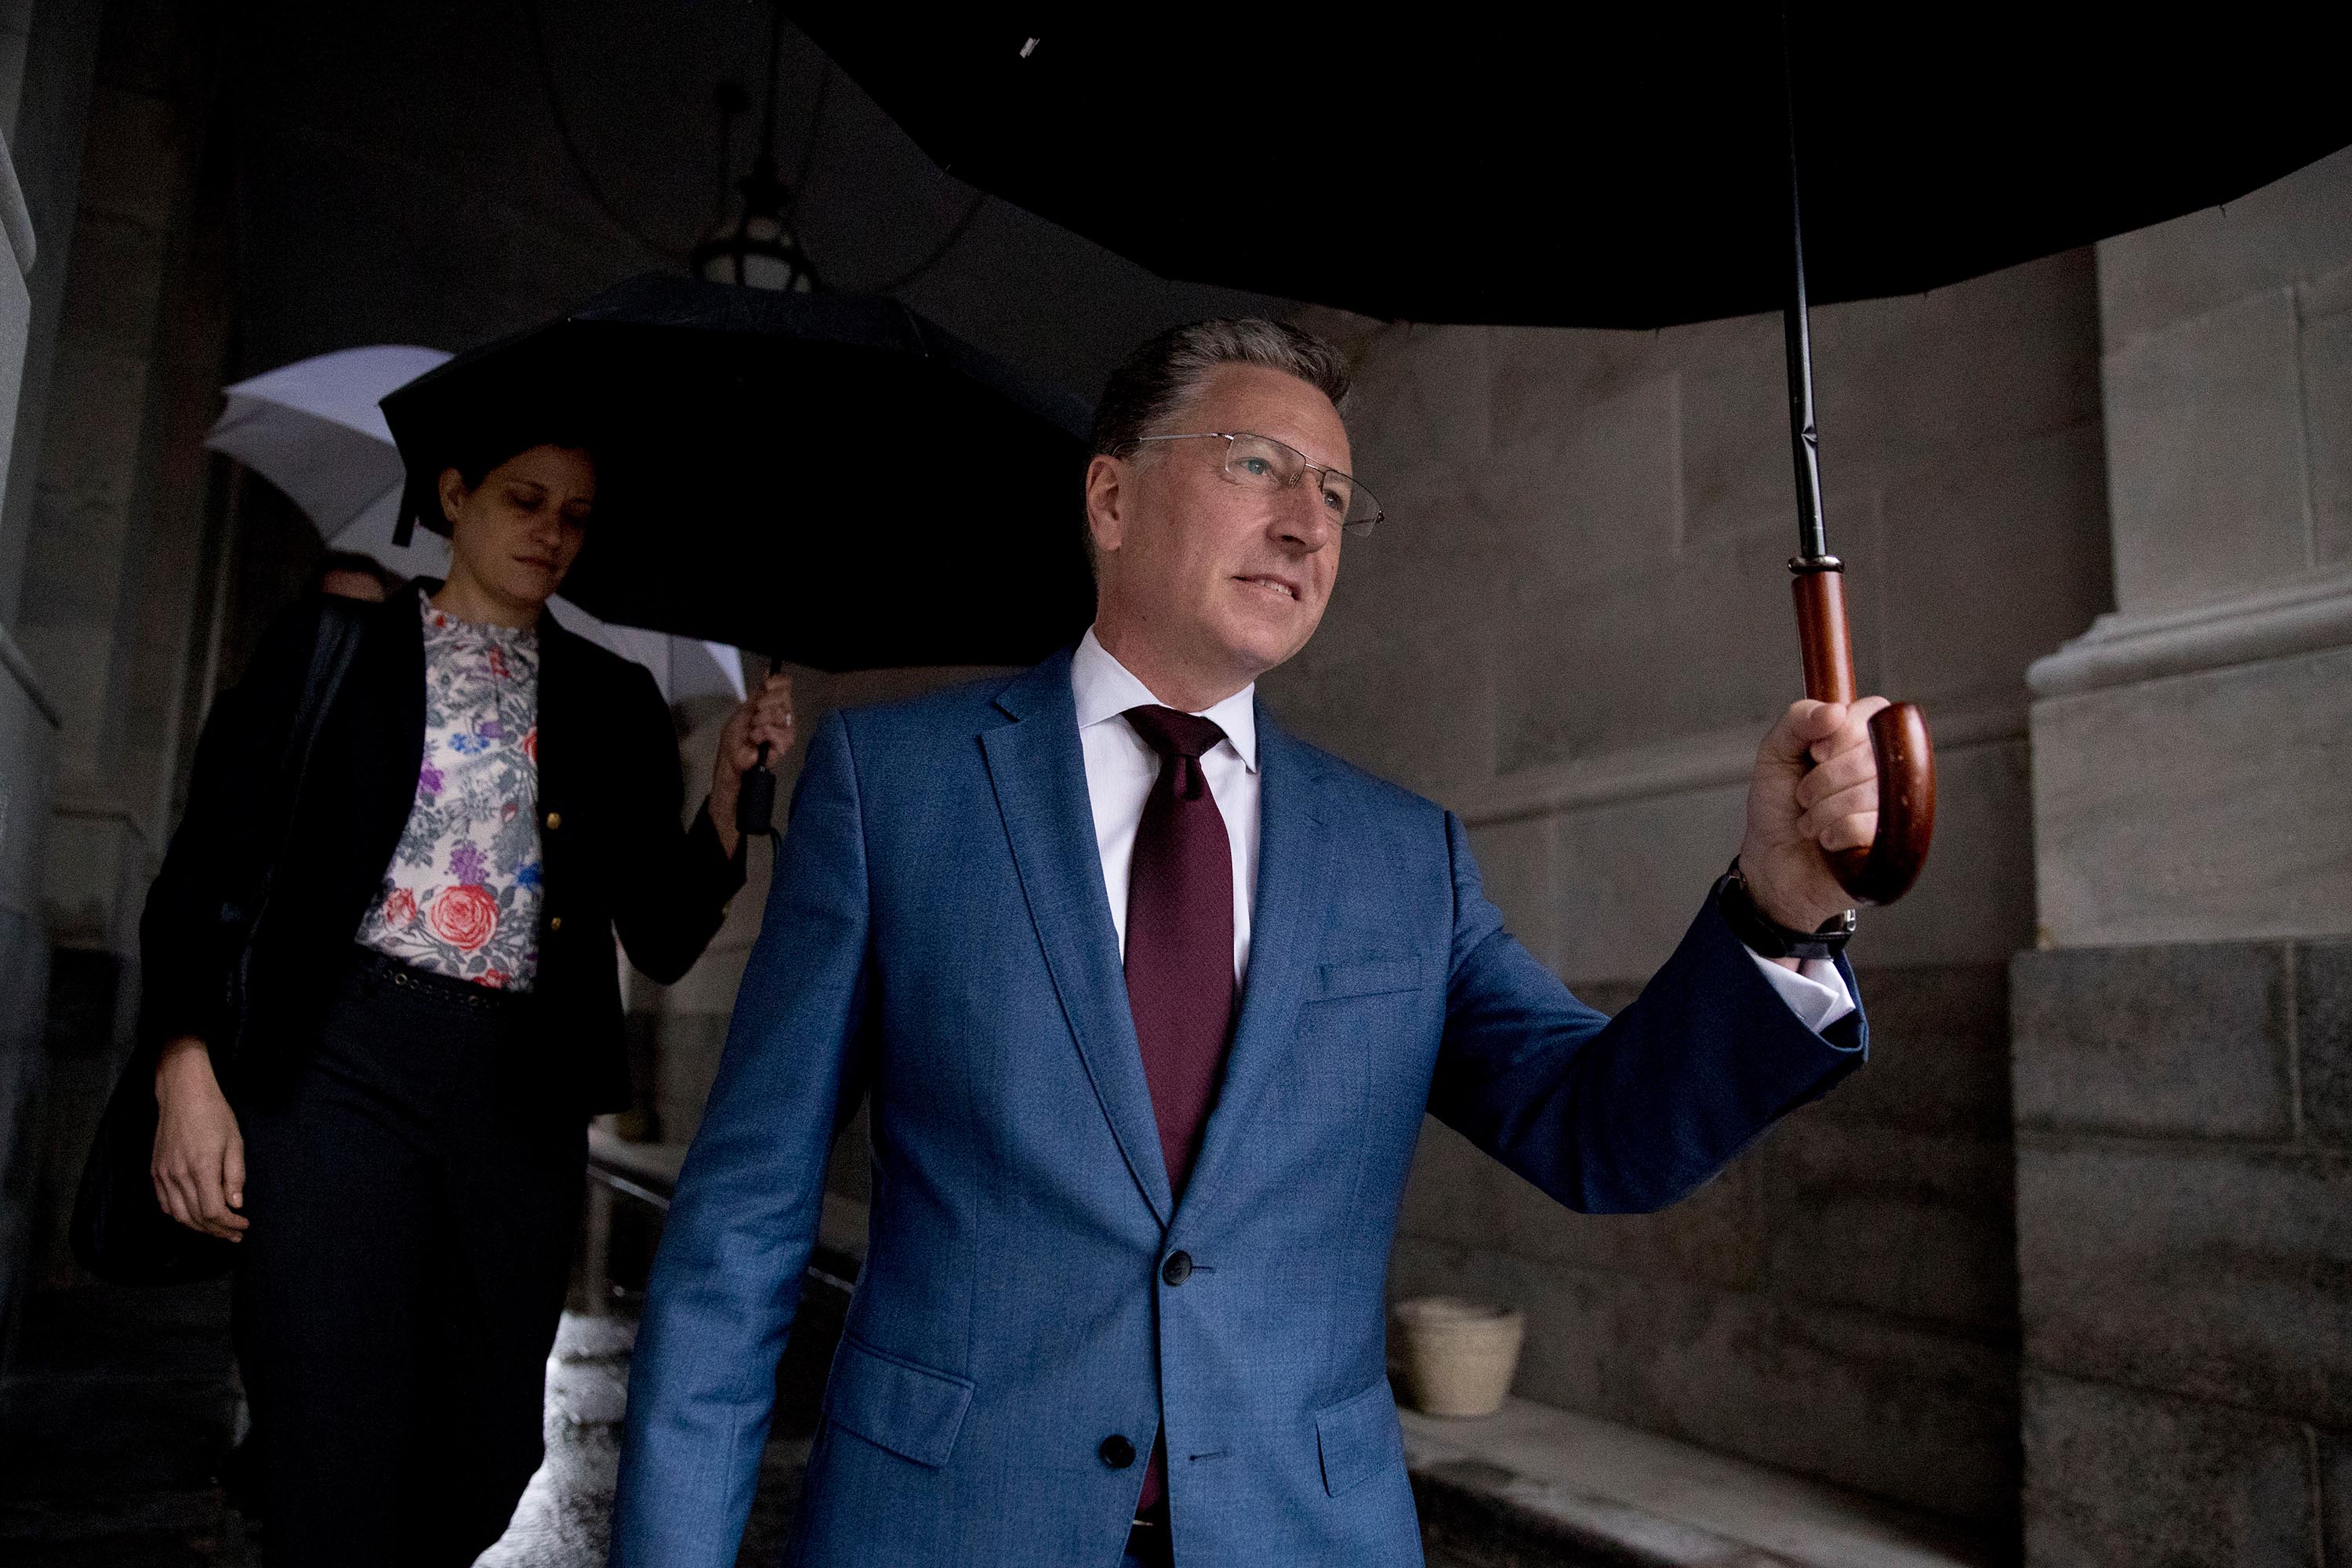 Former US Special Envoy for Ukraine Kurt Volker is seen after attending a closed door meeting at the US Capitol on October 16.